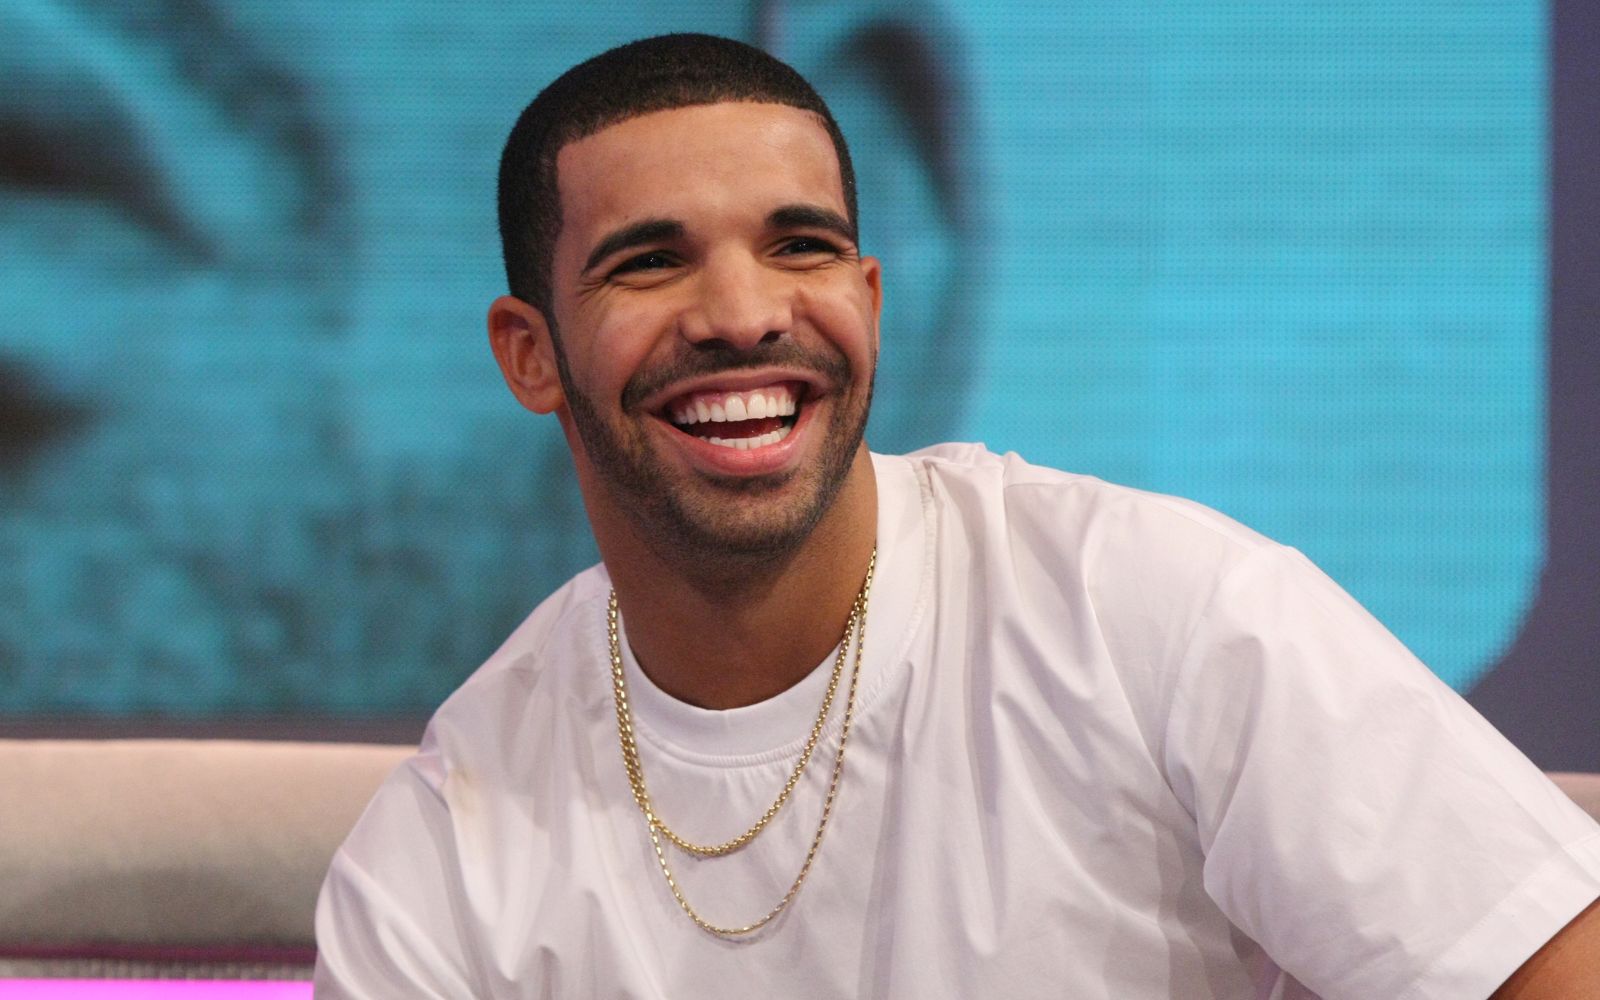 What Makes Drake's Bed Worth $400,000?